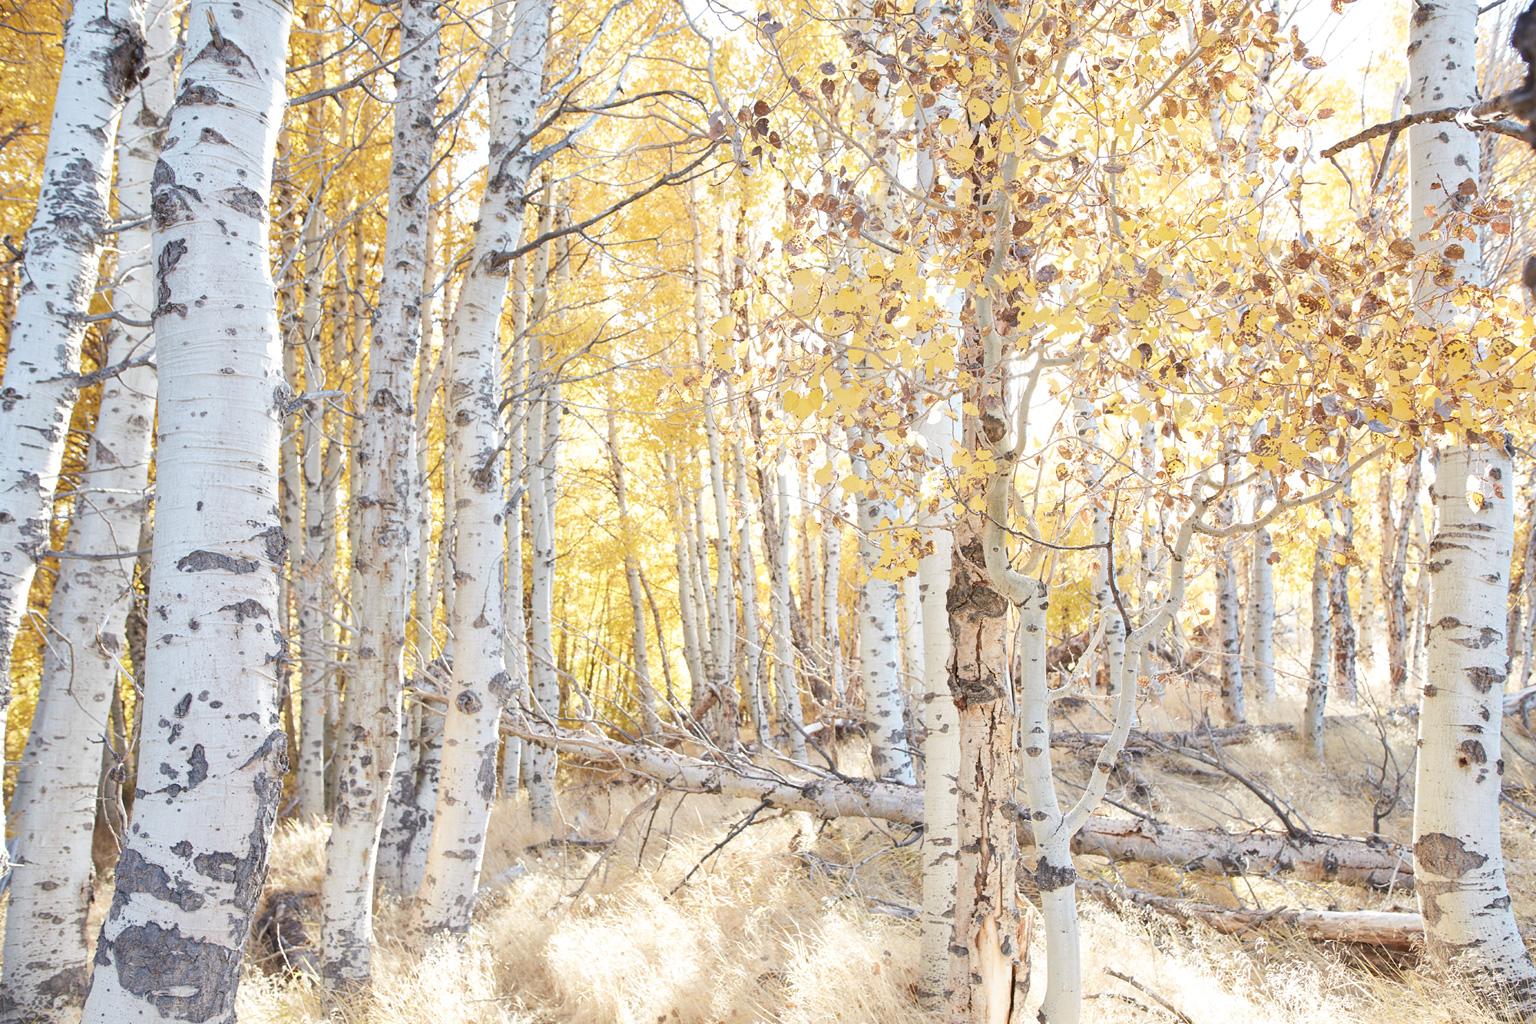 Aspen Study I - large scale photograph of Indian summer autumnal color palette